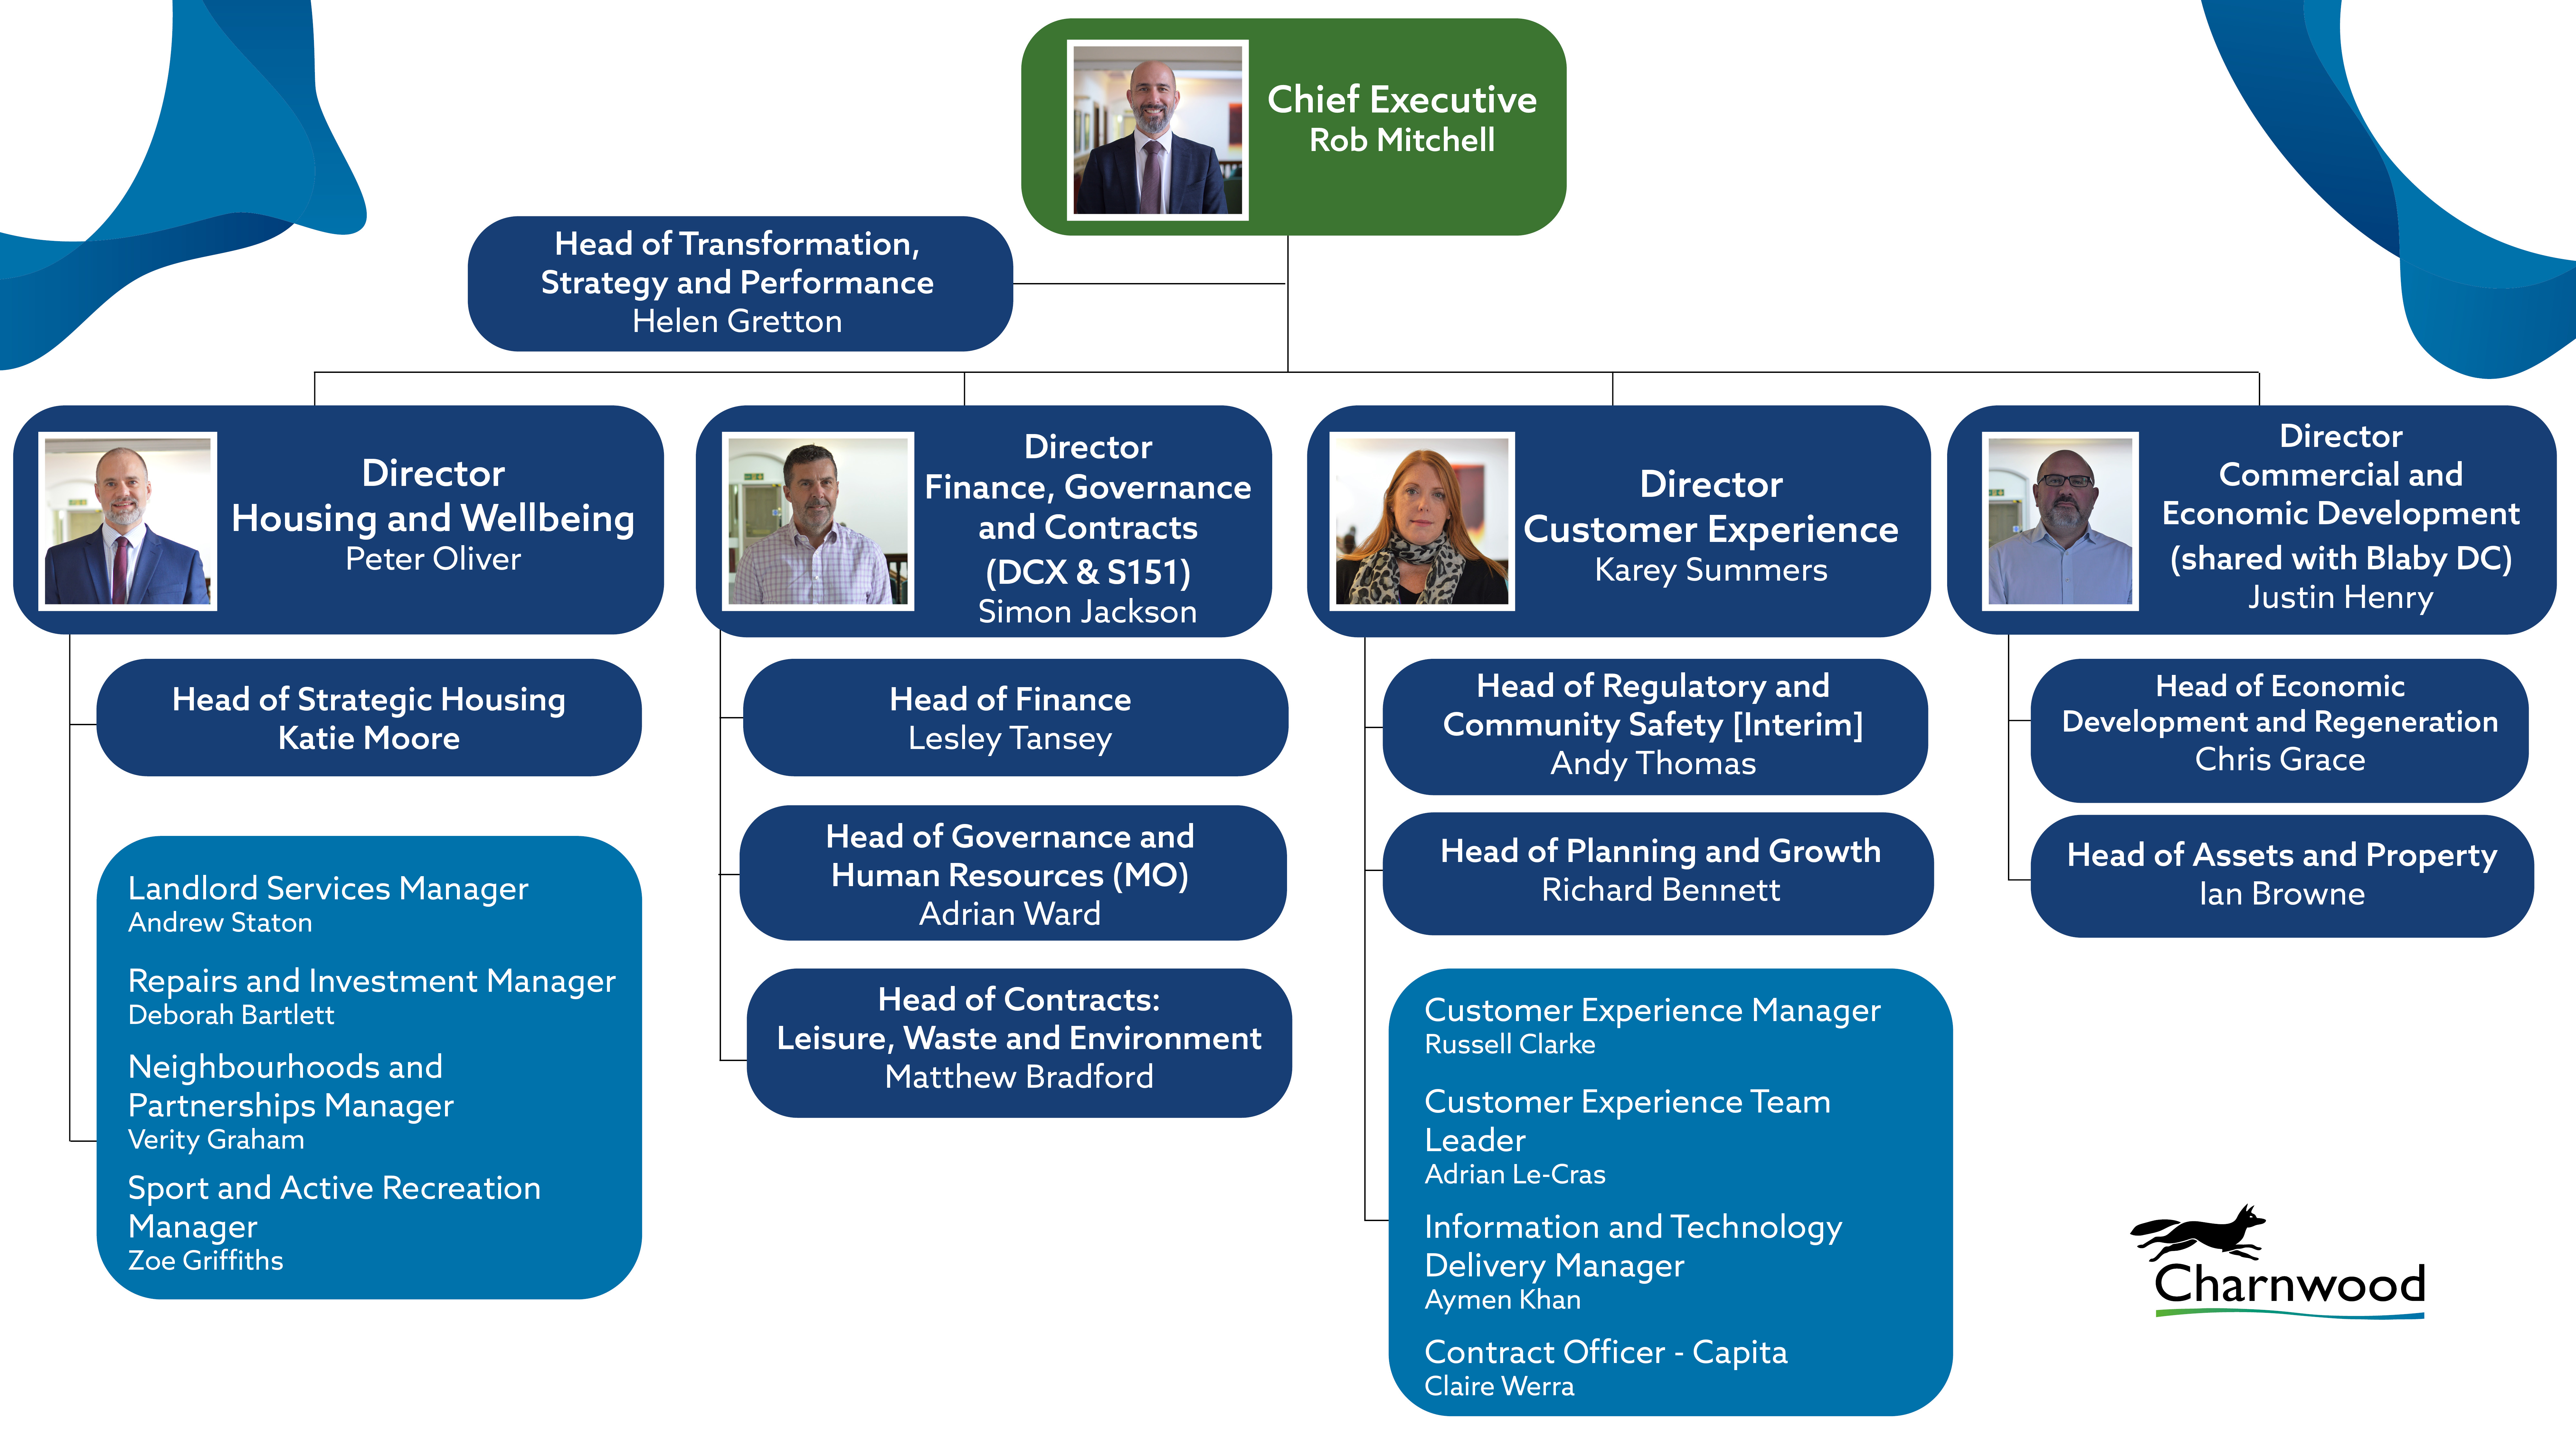 The organisation structure for Charnwood Borough Council